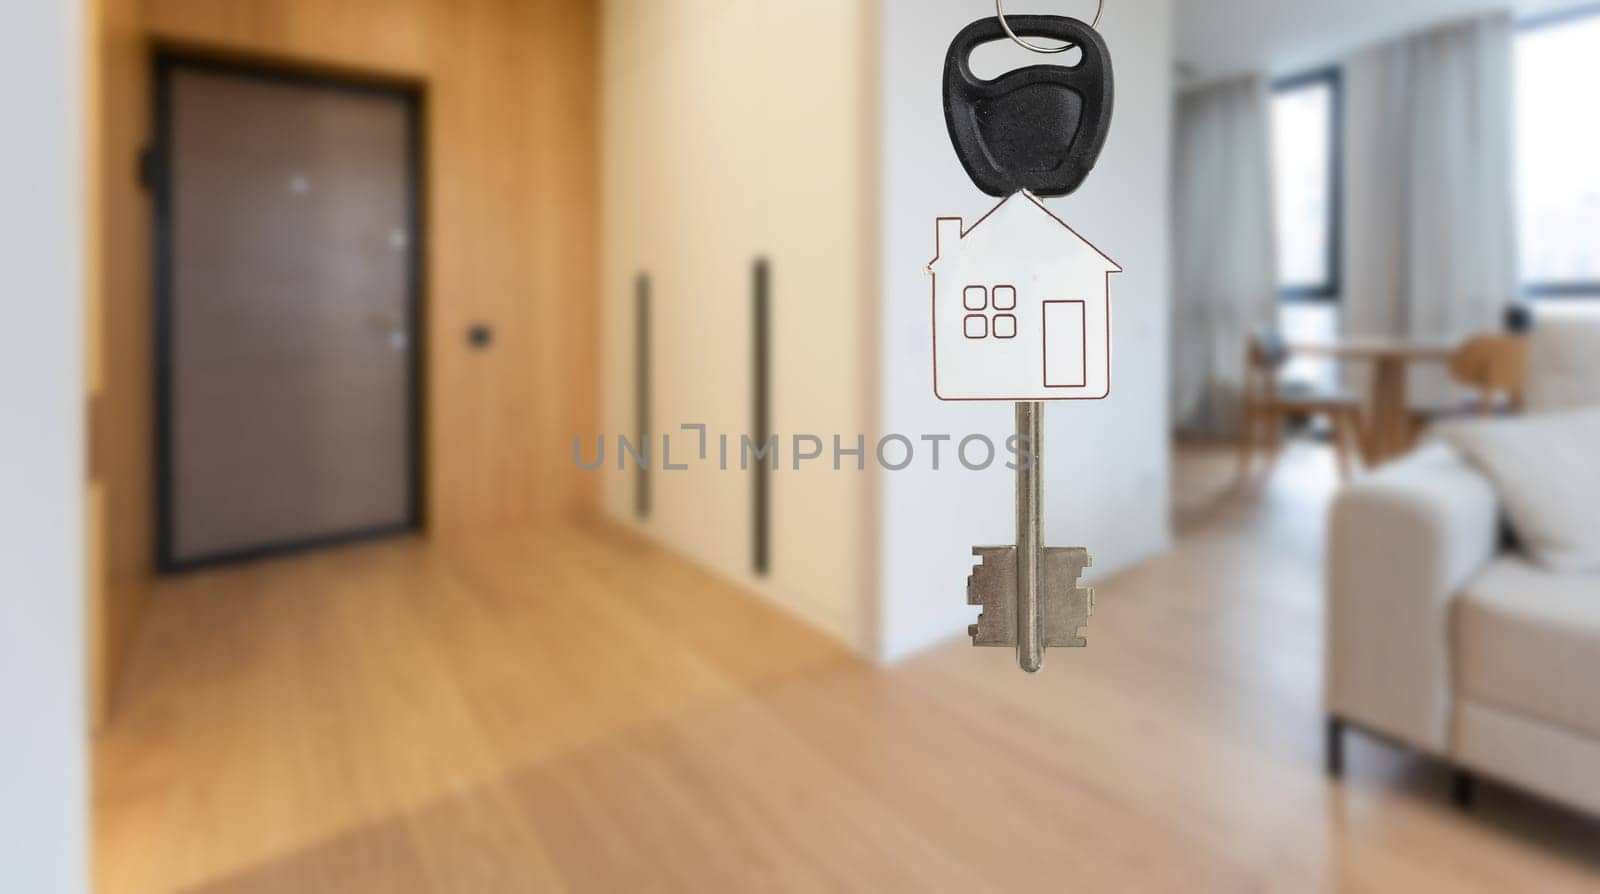 Blurred photo of Key hanging electronic devices are stored. High quality photo